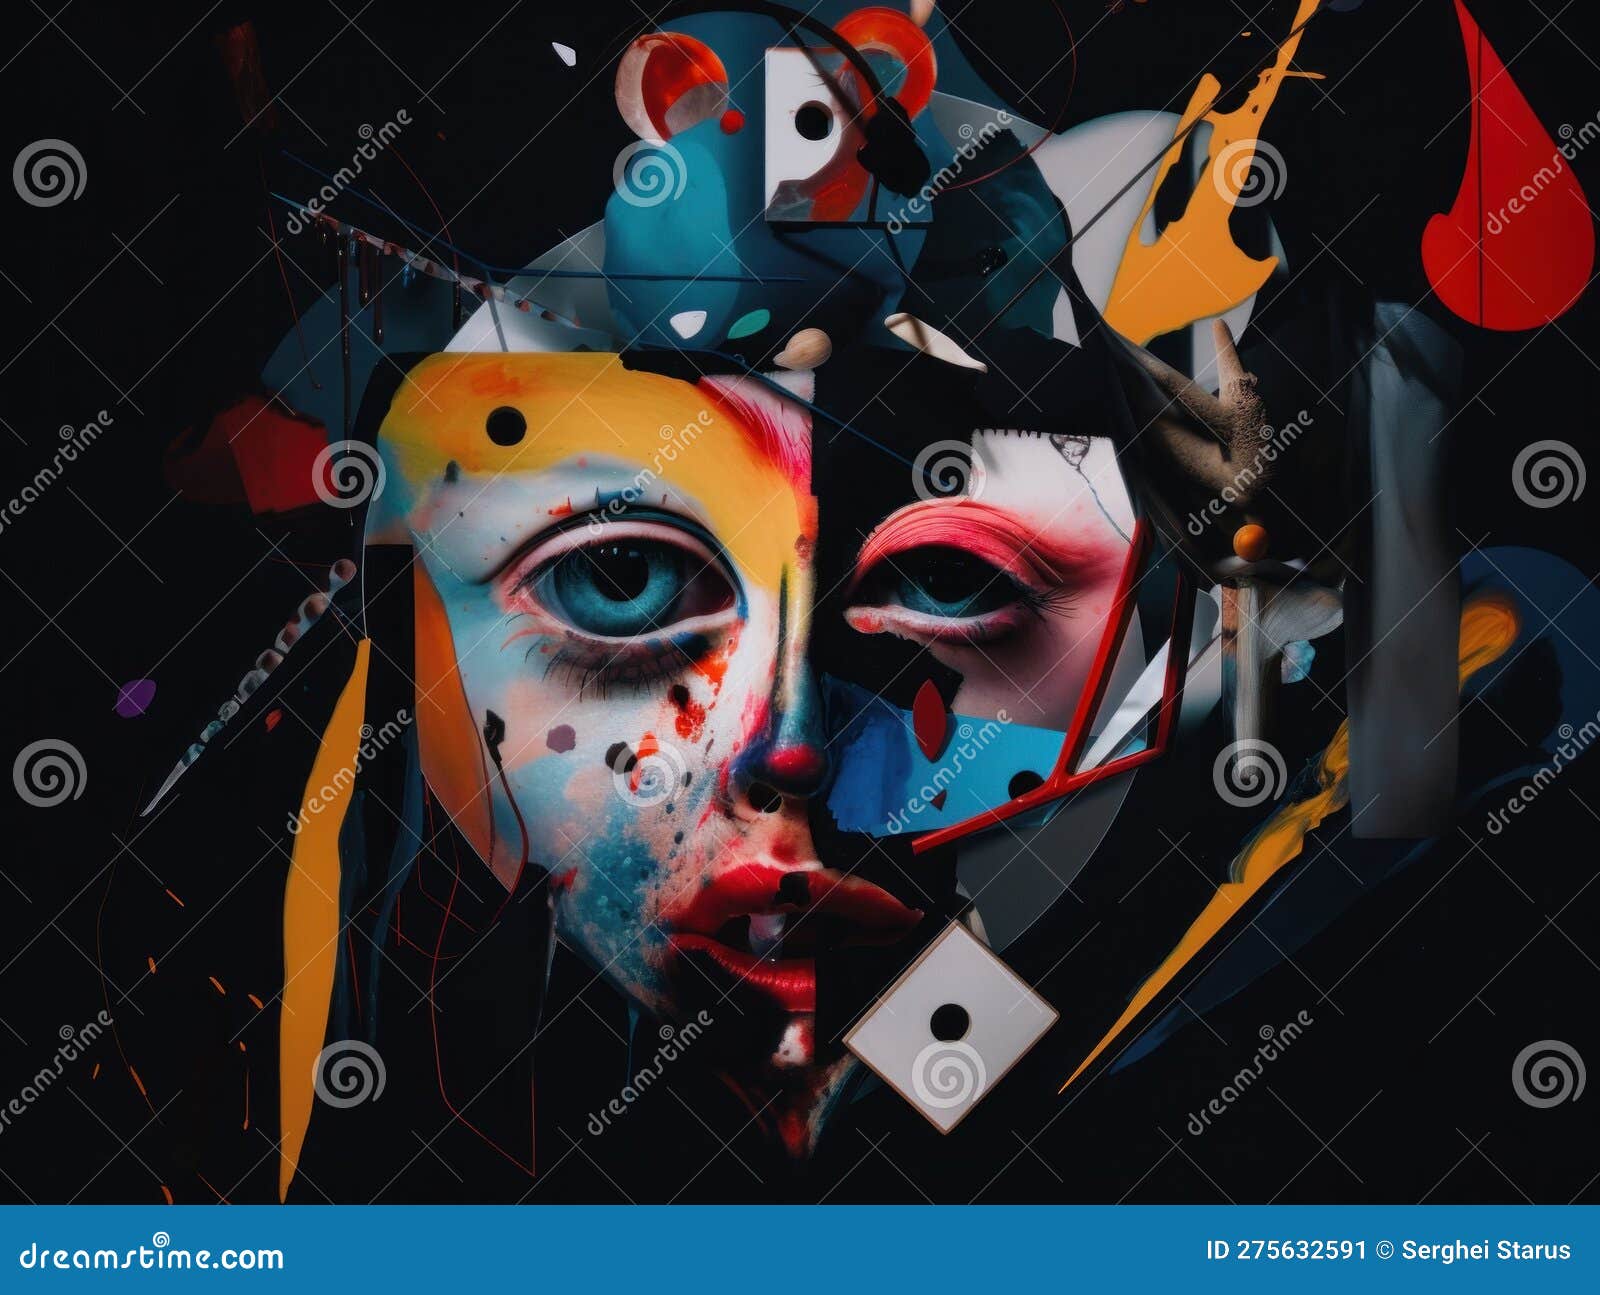 Abstract Representation Of Paranoia Painting Of A Woman S Face With